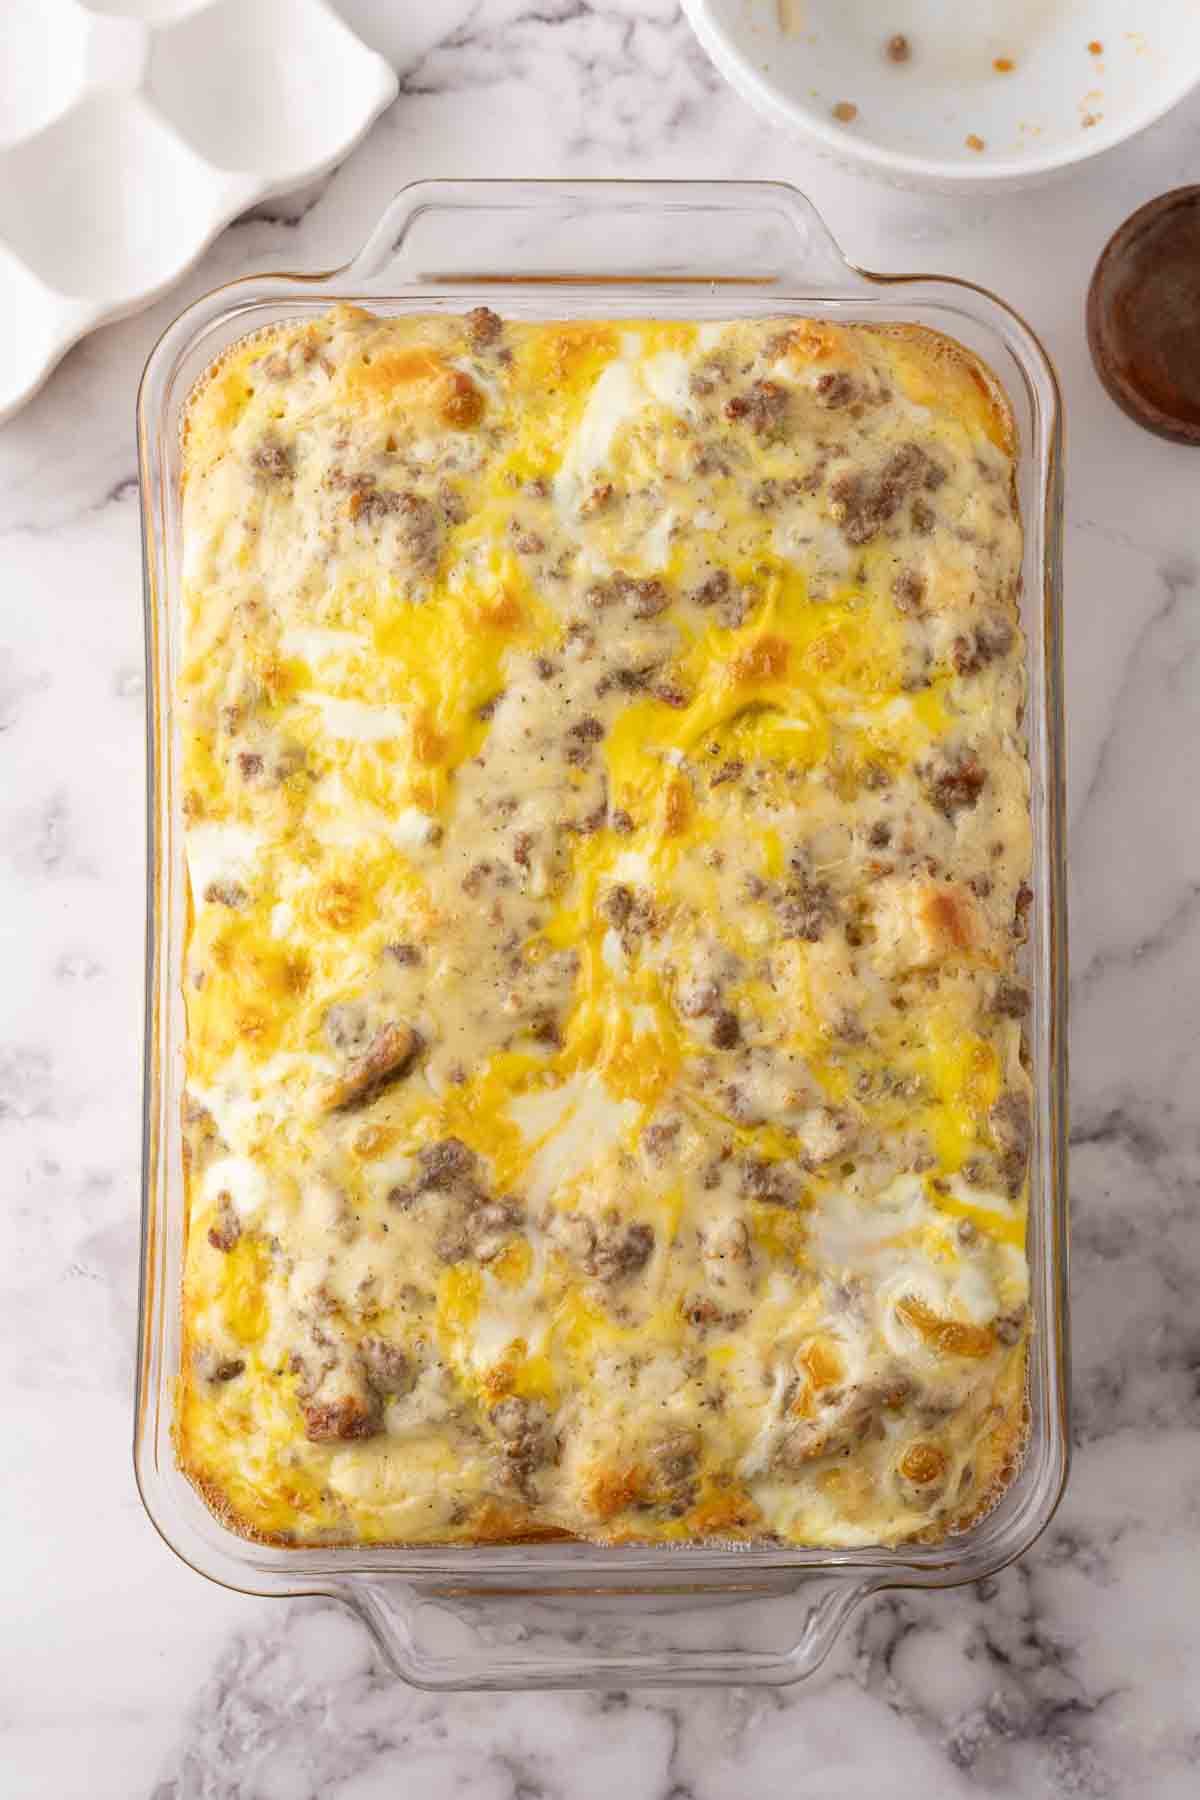 biscuits and gravy casserole recipe in a 9x12 dish.